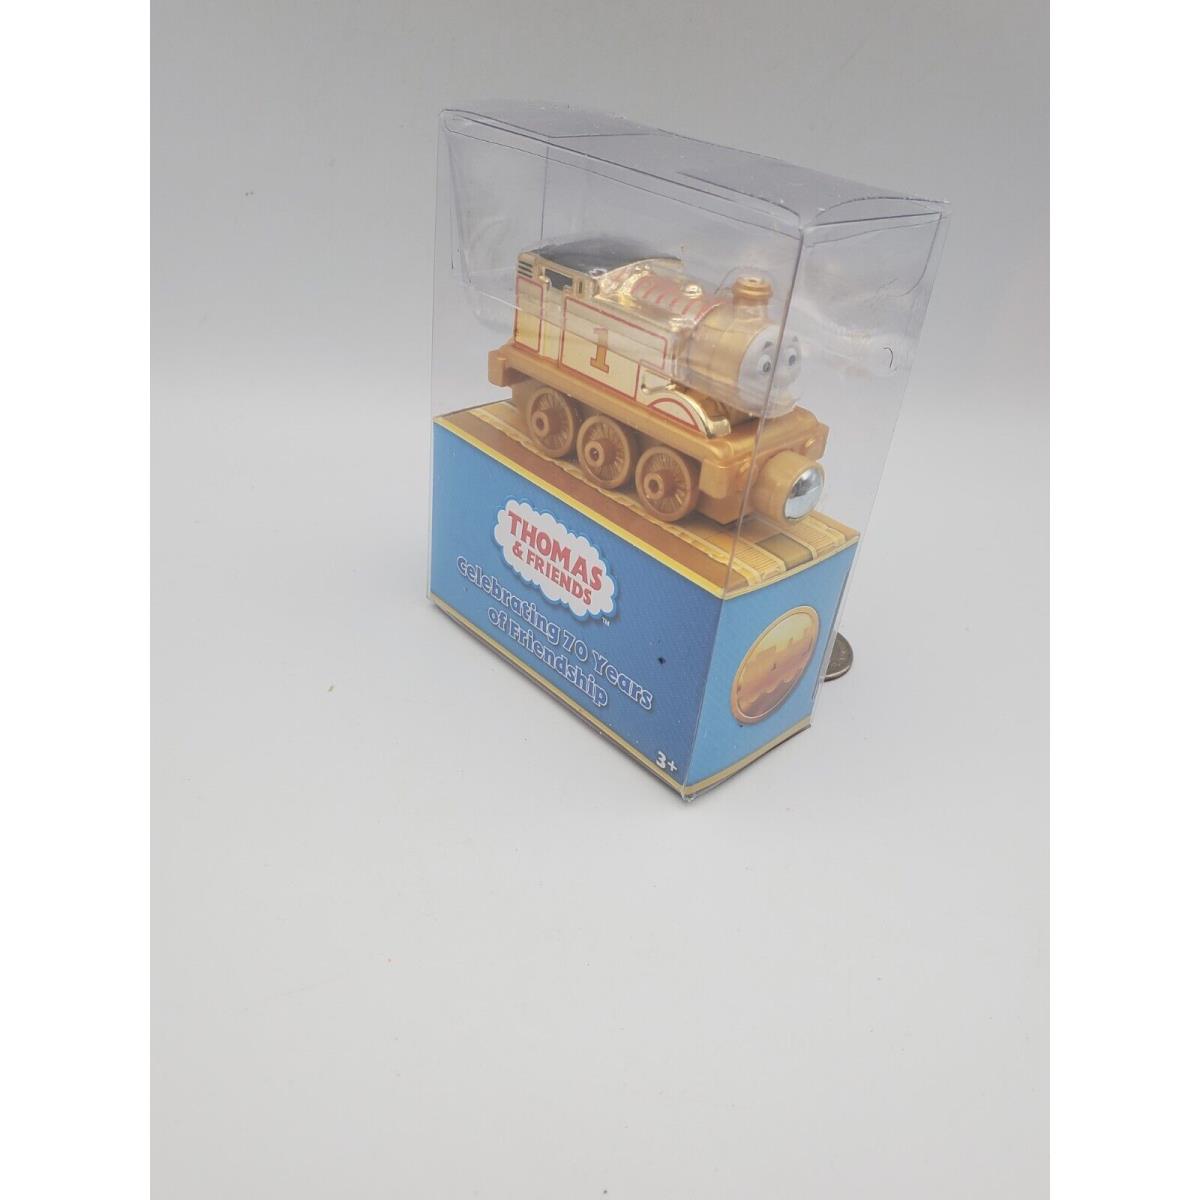 Thomas & Friends toy  - Gold